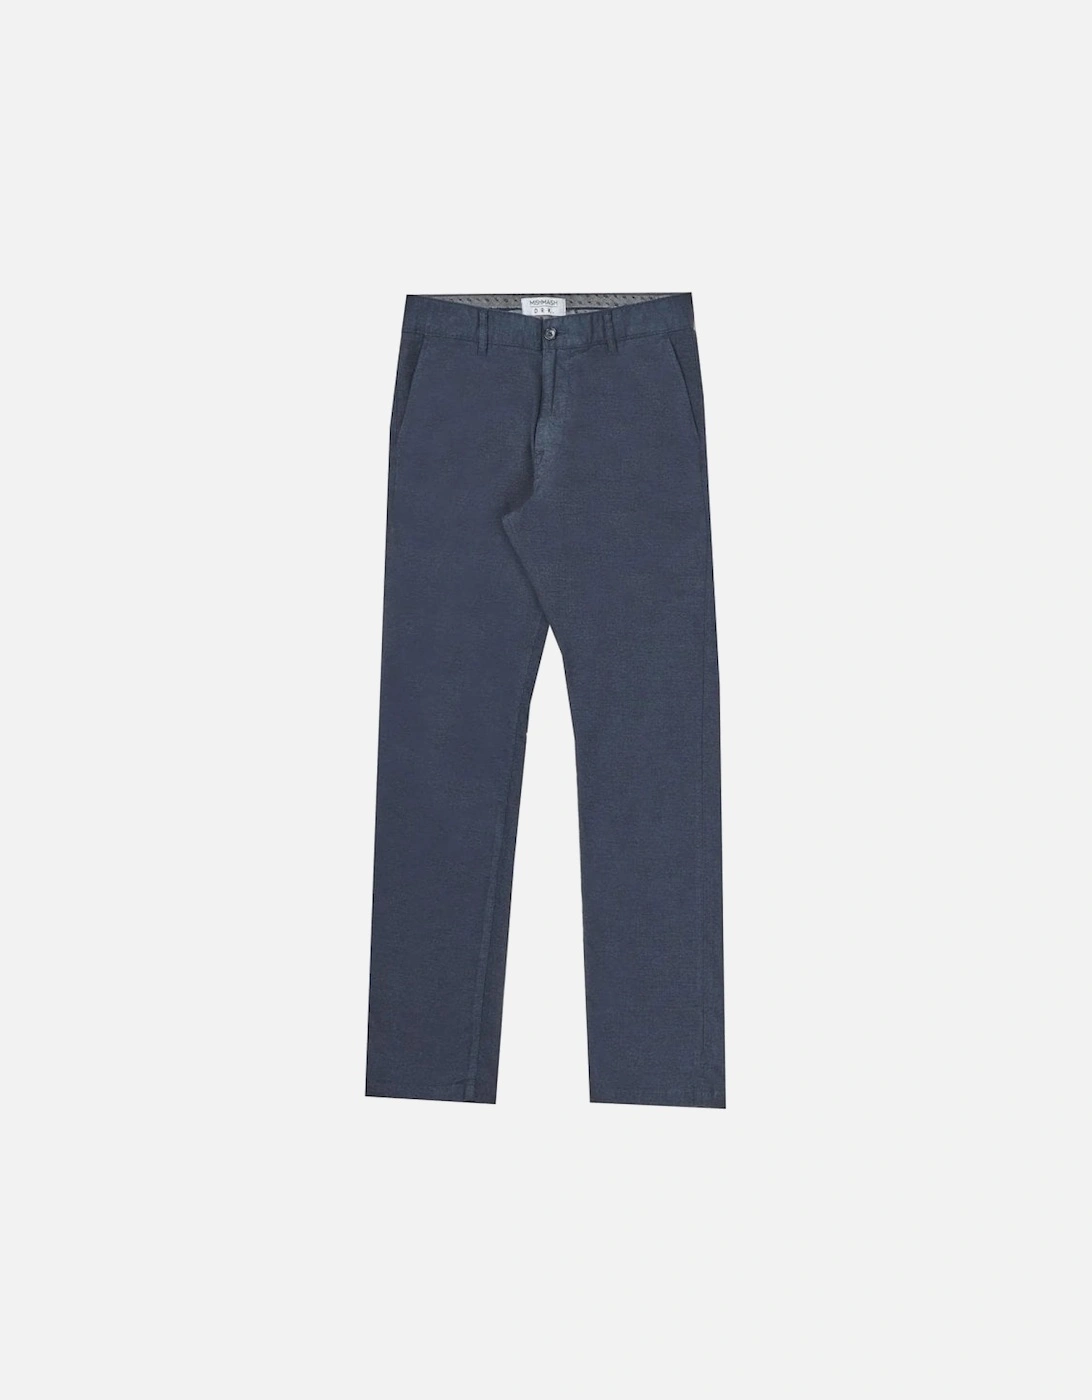 Bromley casual 4 pocket tapered chino - Navy